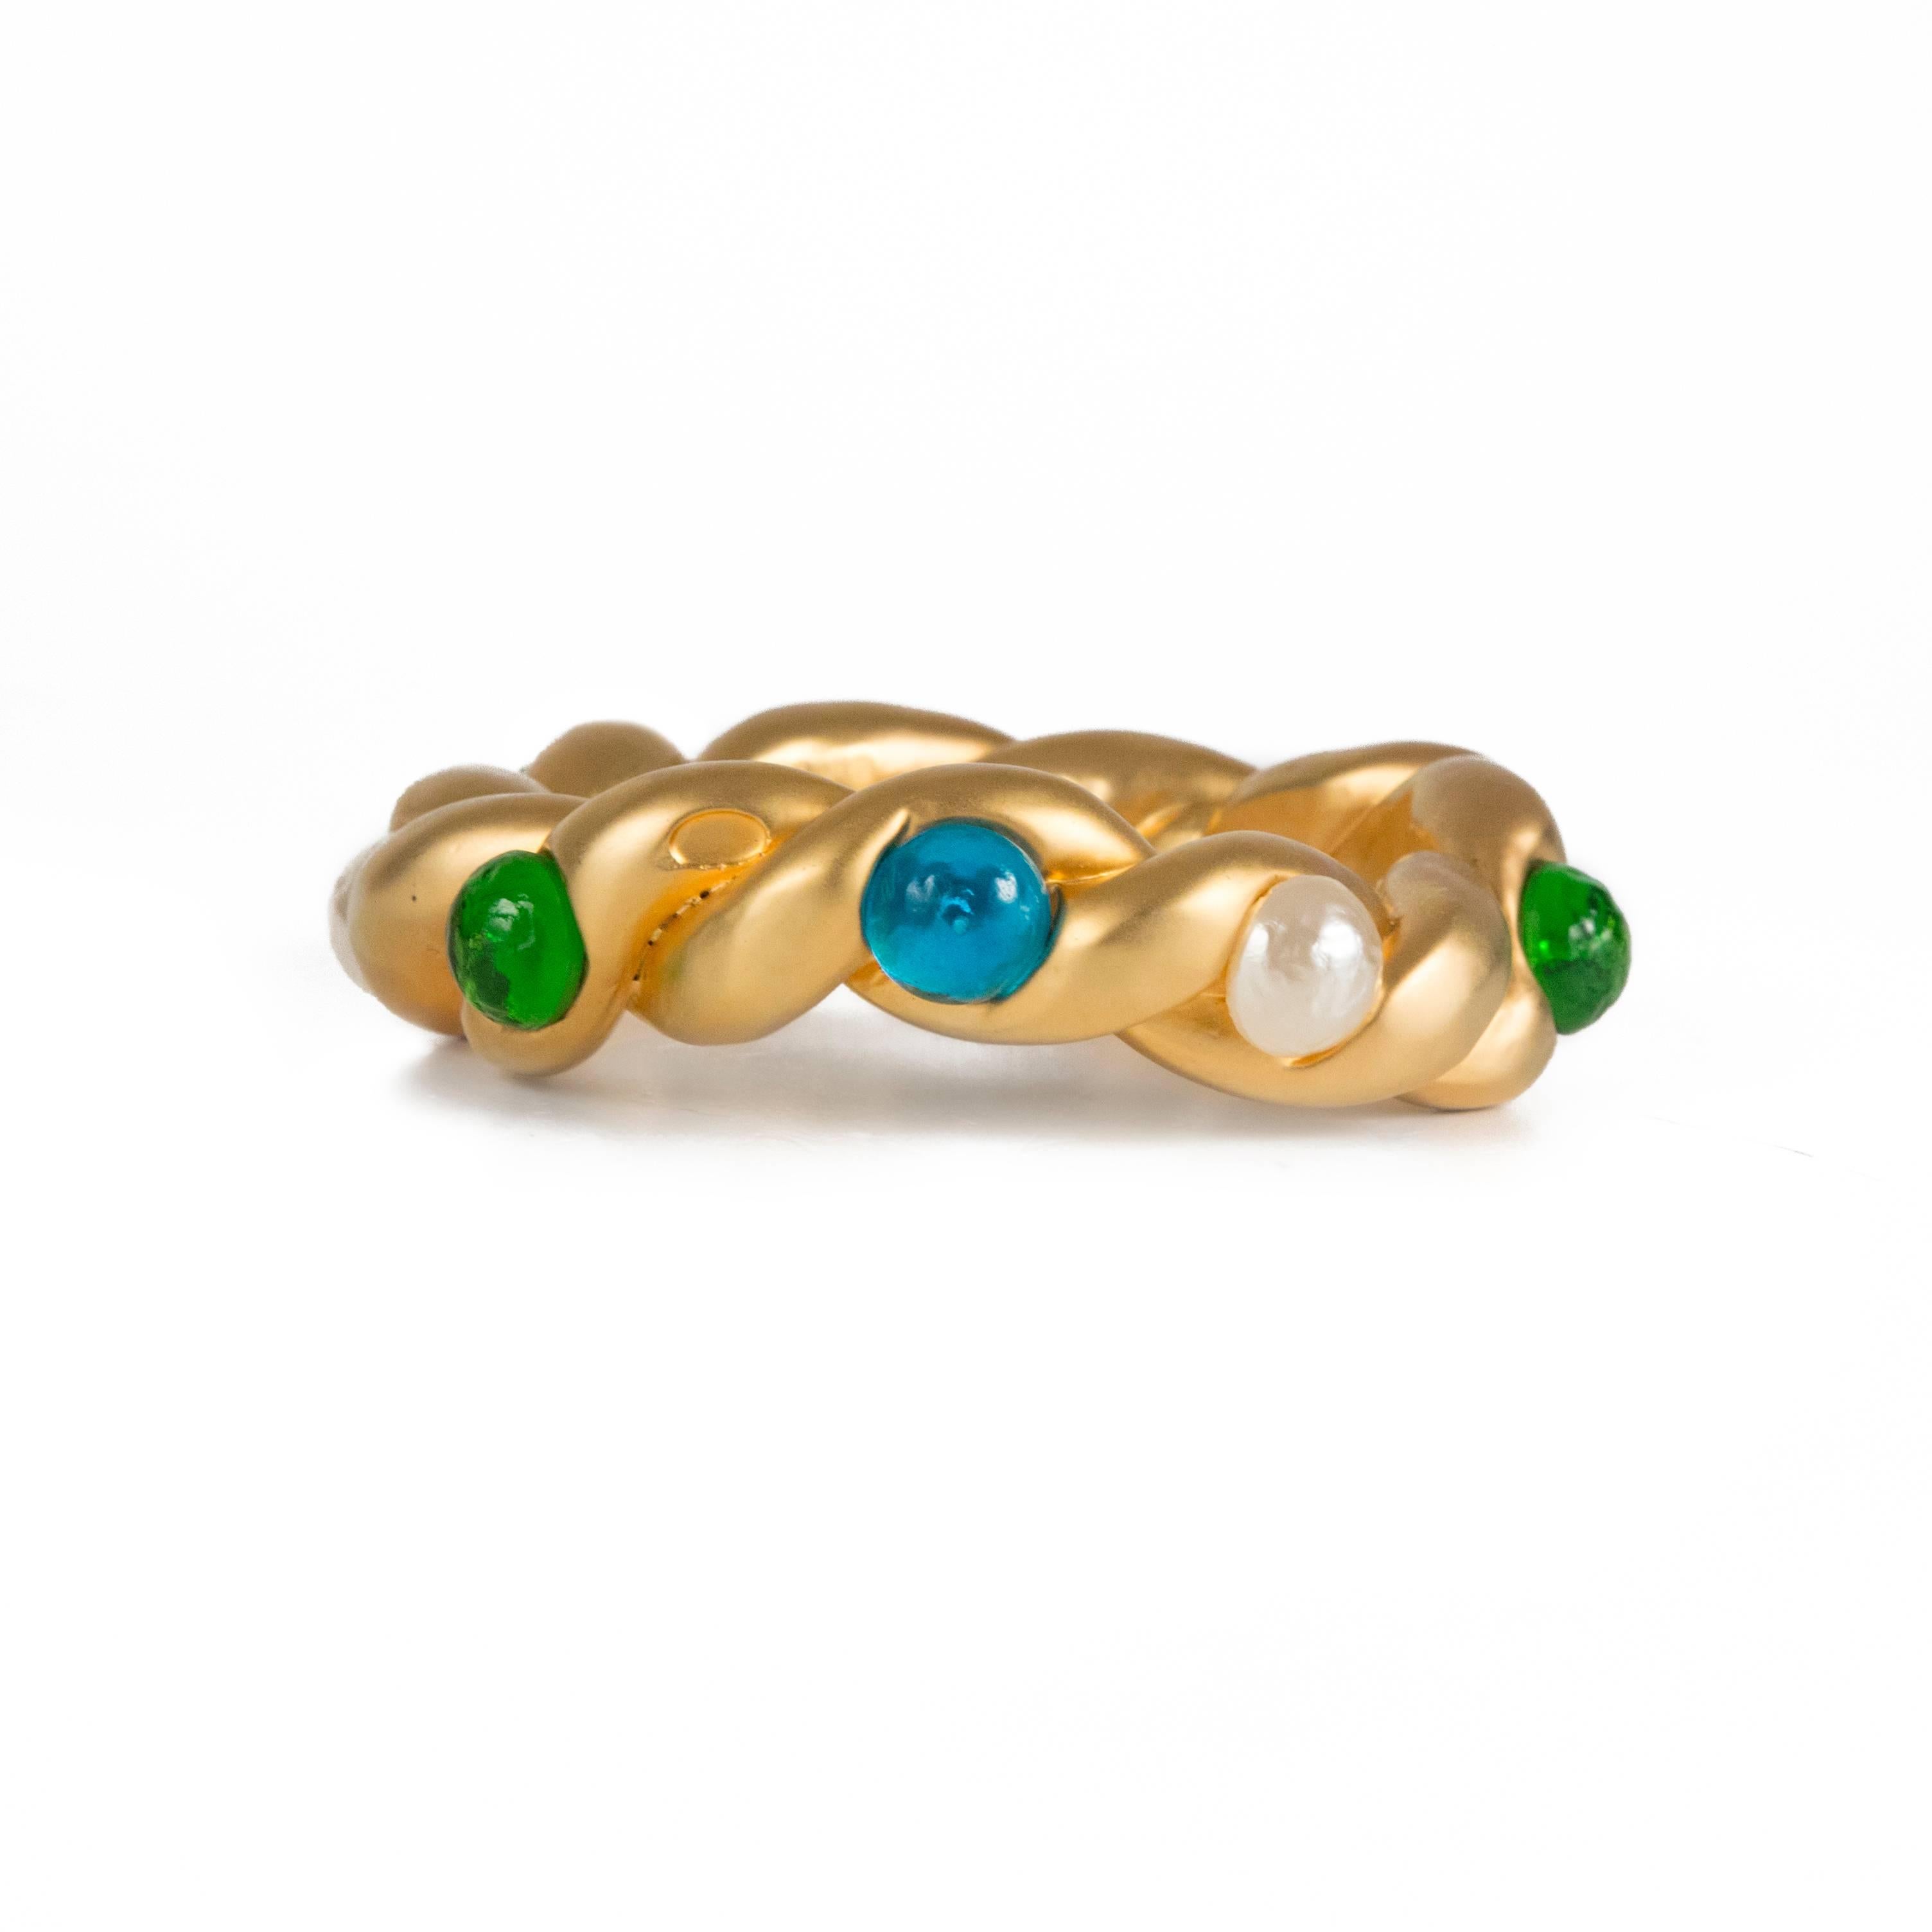 Chanel - Gripoix & Pearl Gold Bangle

Color: Gold

Material: Metal

------------------------------------------------------------

Details:

- gold tone hardware bracelet

- pearl beads throughout

- green & blue glass stones